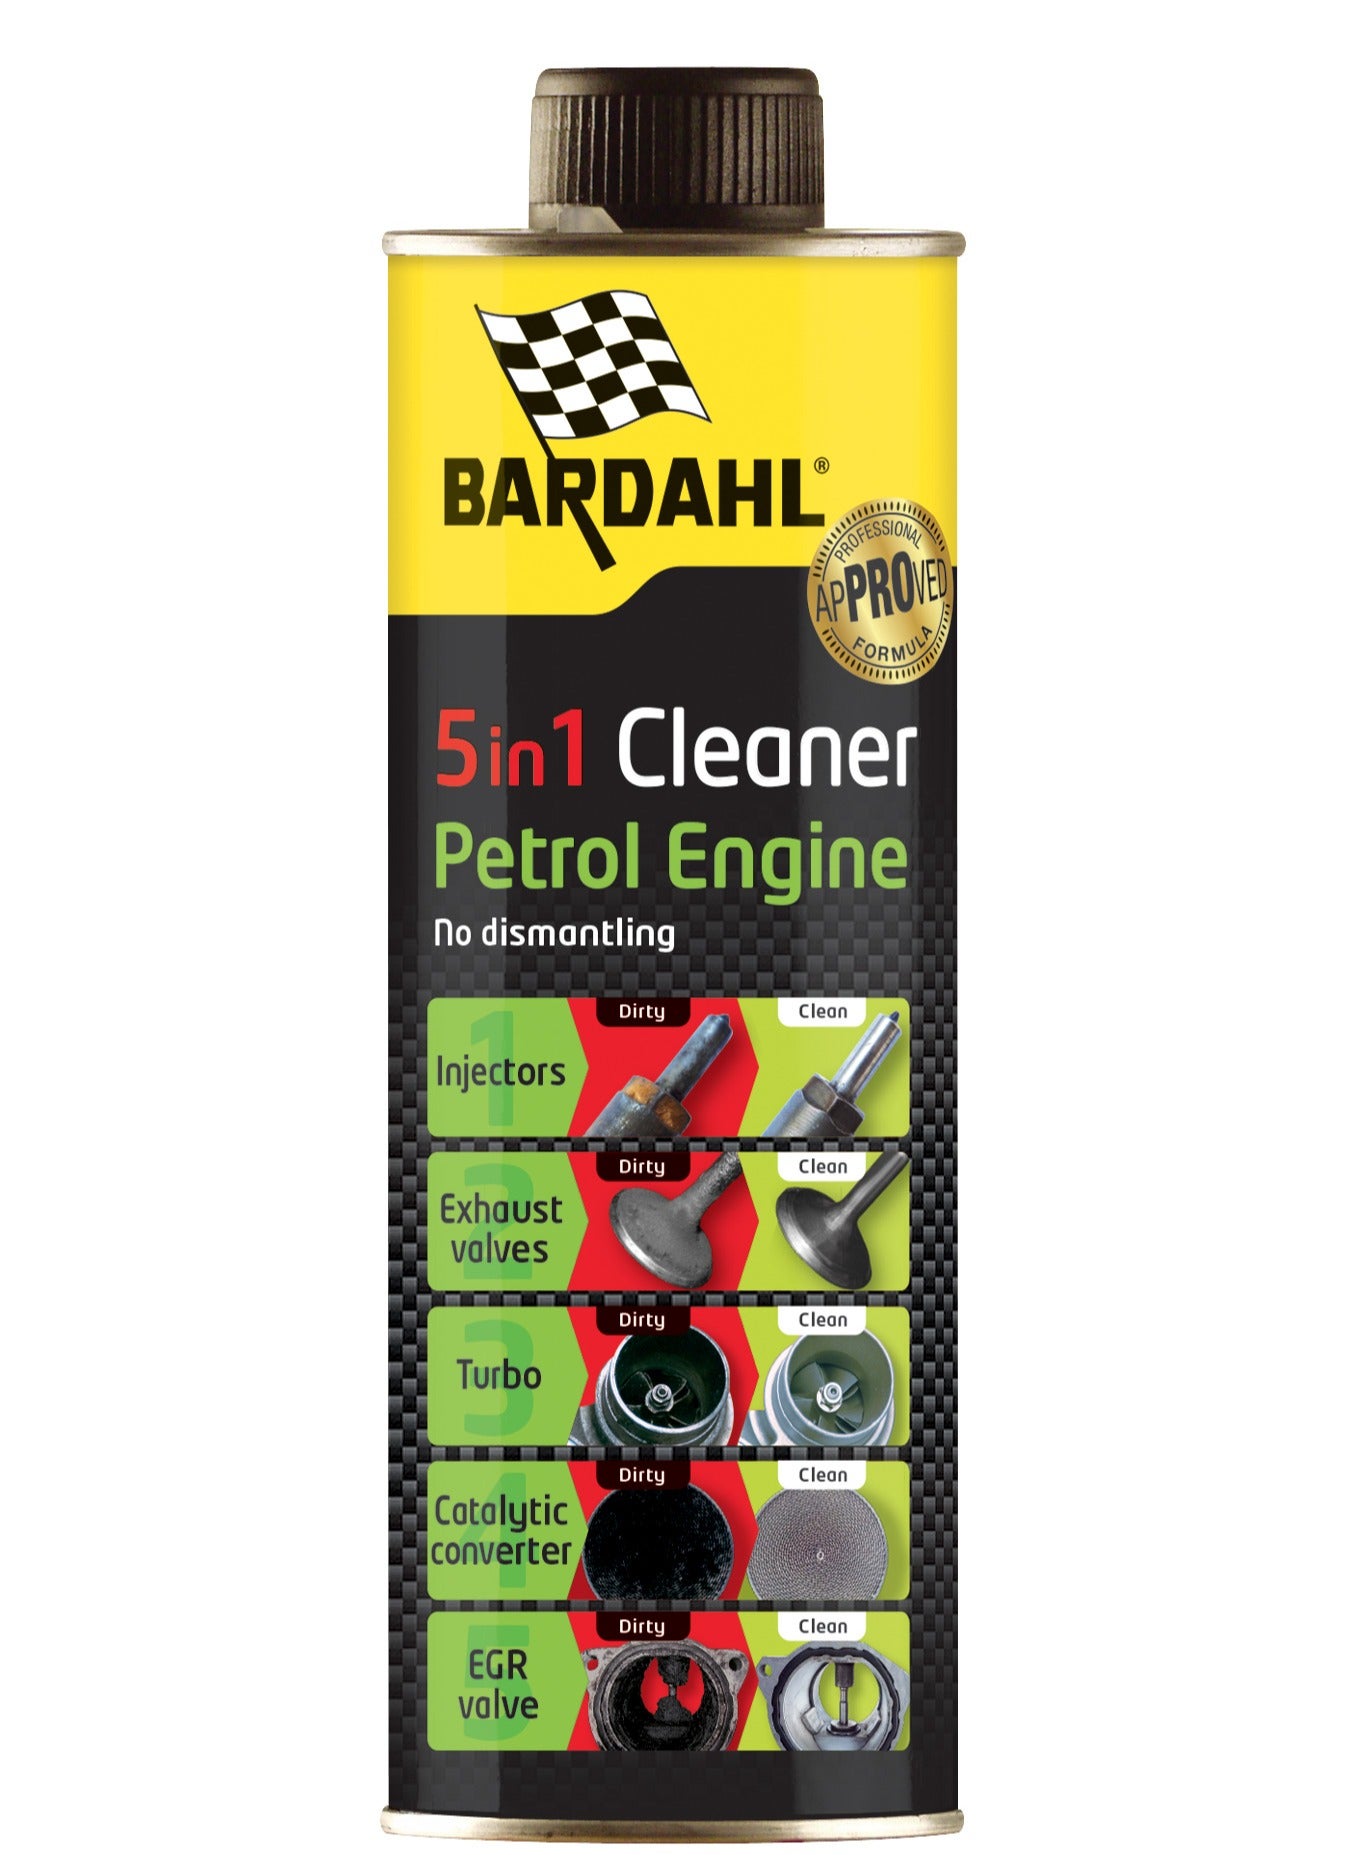 Turbo Cleaner - cleans the turbo without dismantling - Bardahl Bardahl